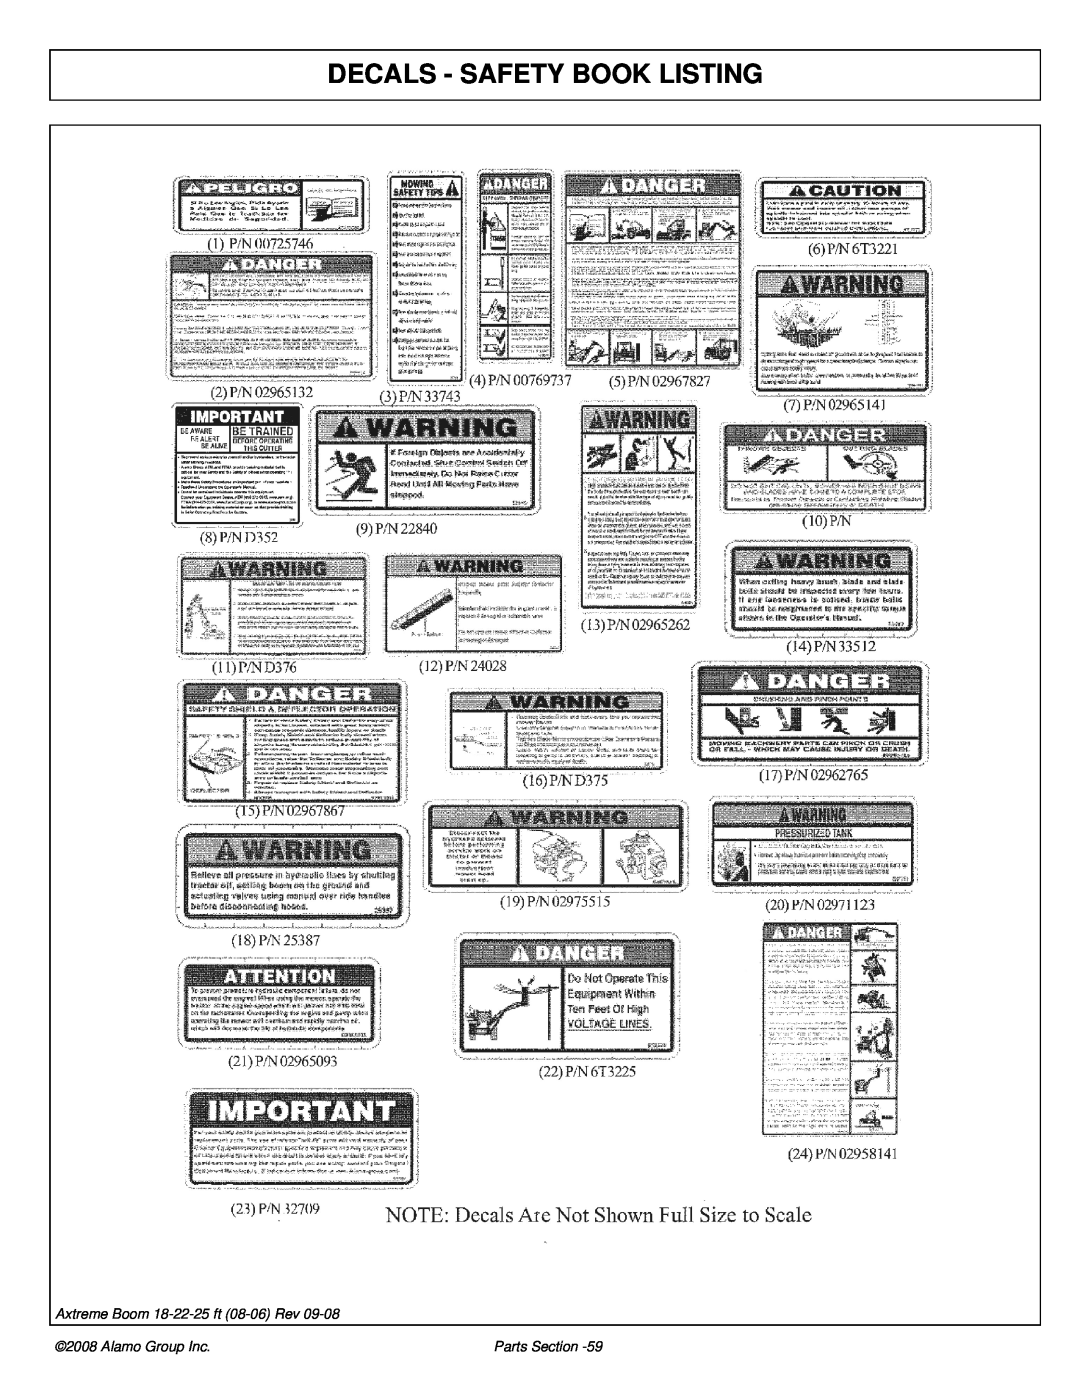 Alamo 02983326P manual Decals - Safety Book Listing, Axtreme Boom 18-22-25 ft 08-06 Rev, Alamo Group Inc, Parts Section 